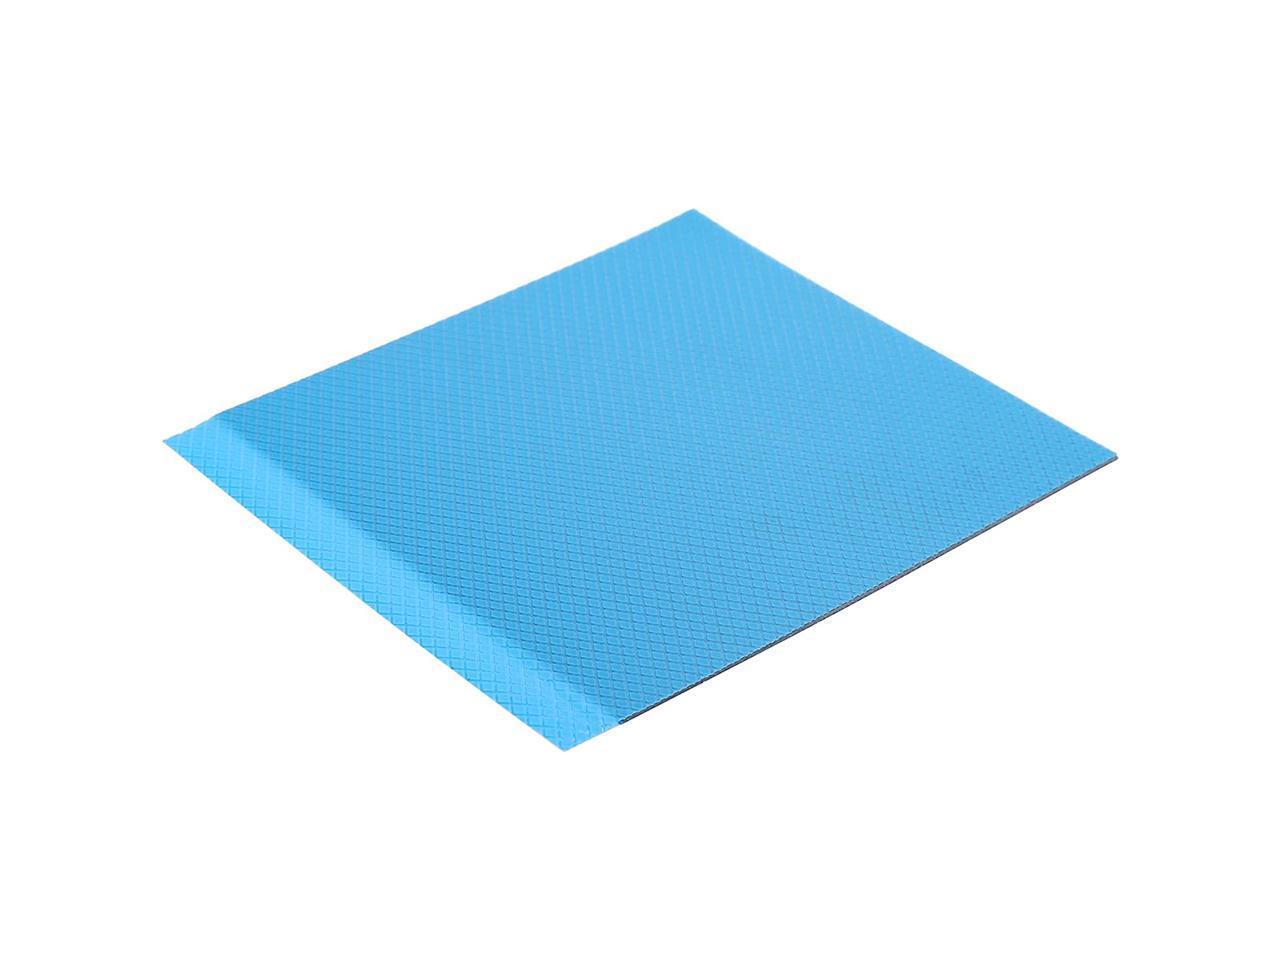 Gelid Solutions Ultimate GP-Ultimate-Thermal Pad 120x120x2.0mm.  1 Pack Model TP-GP04-S-D